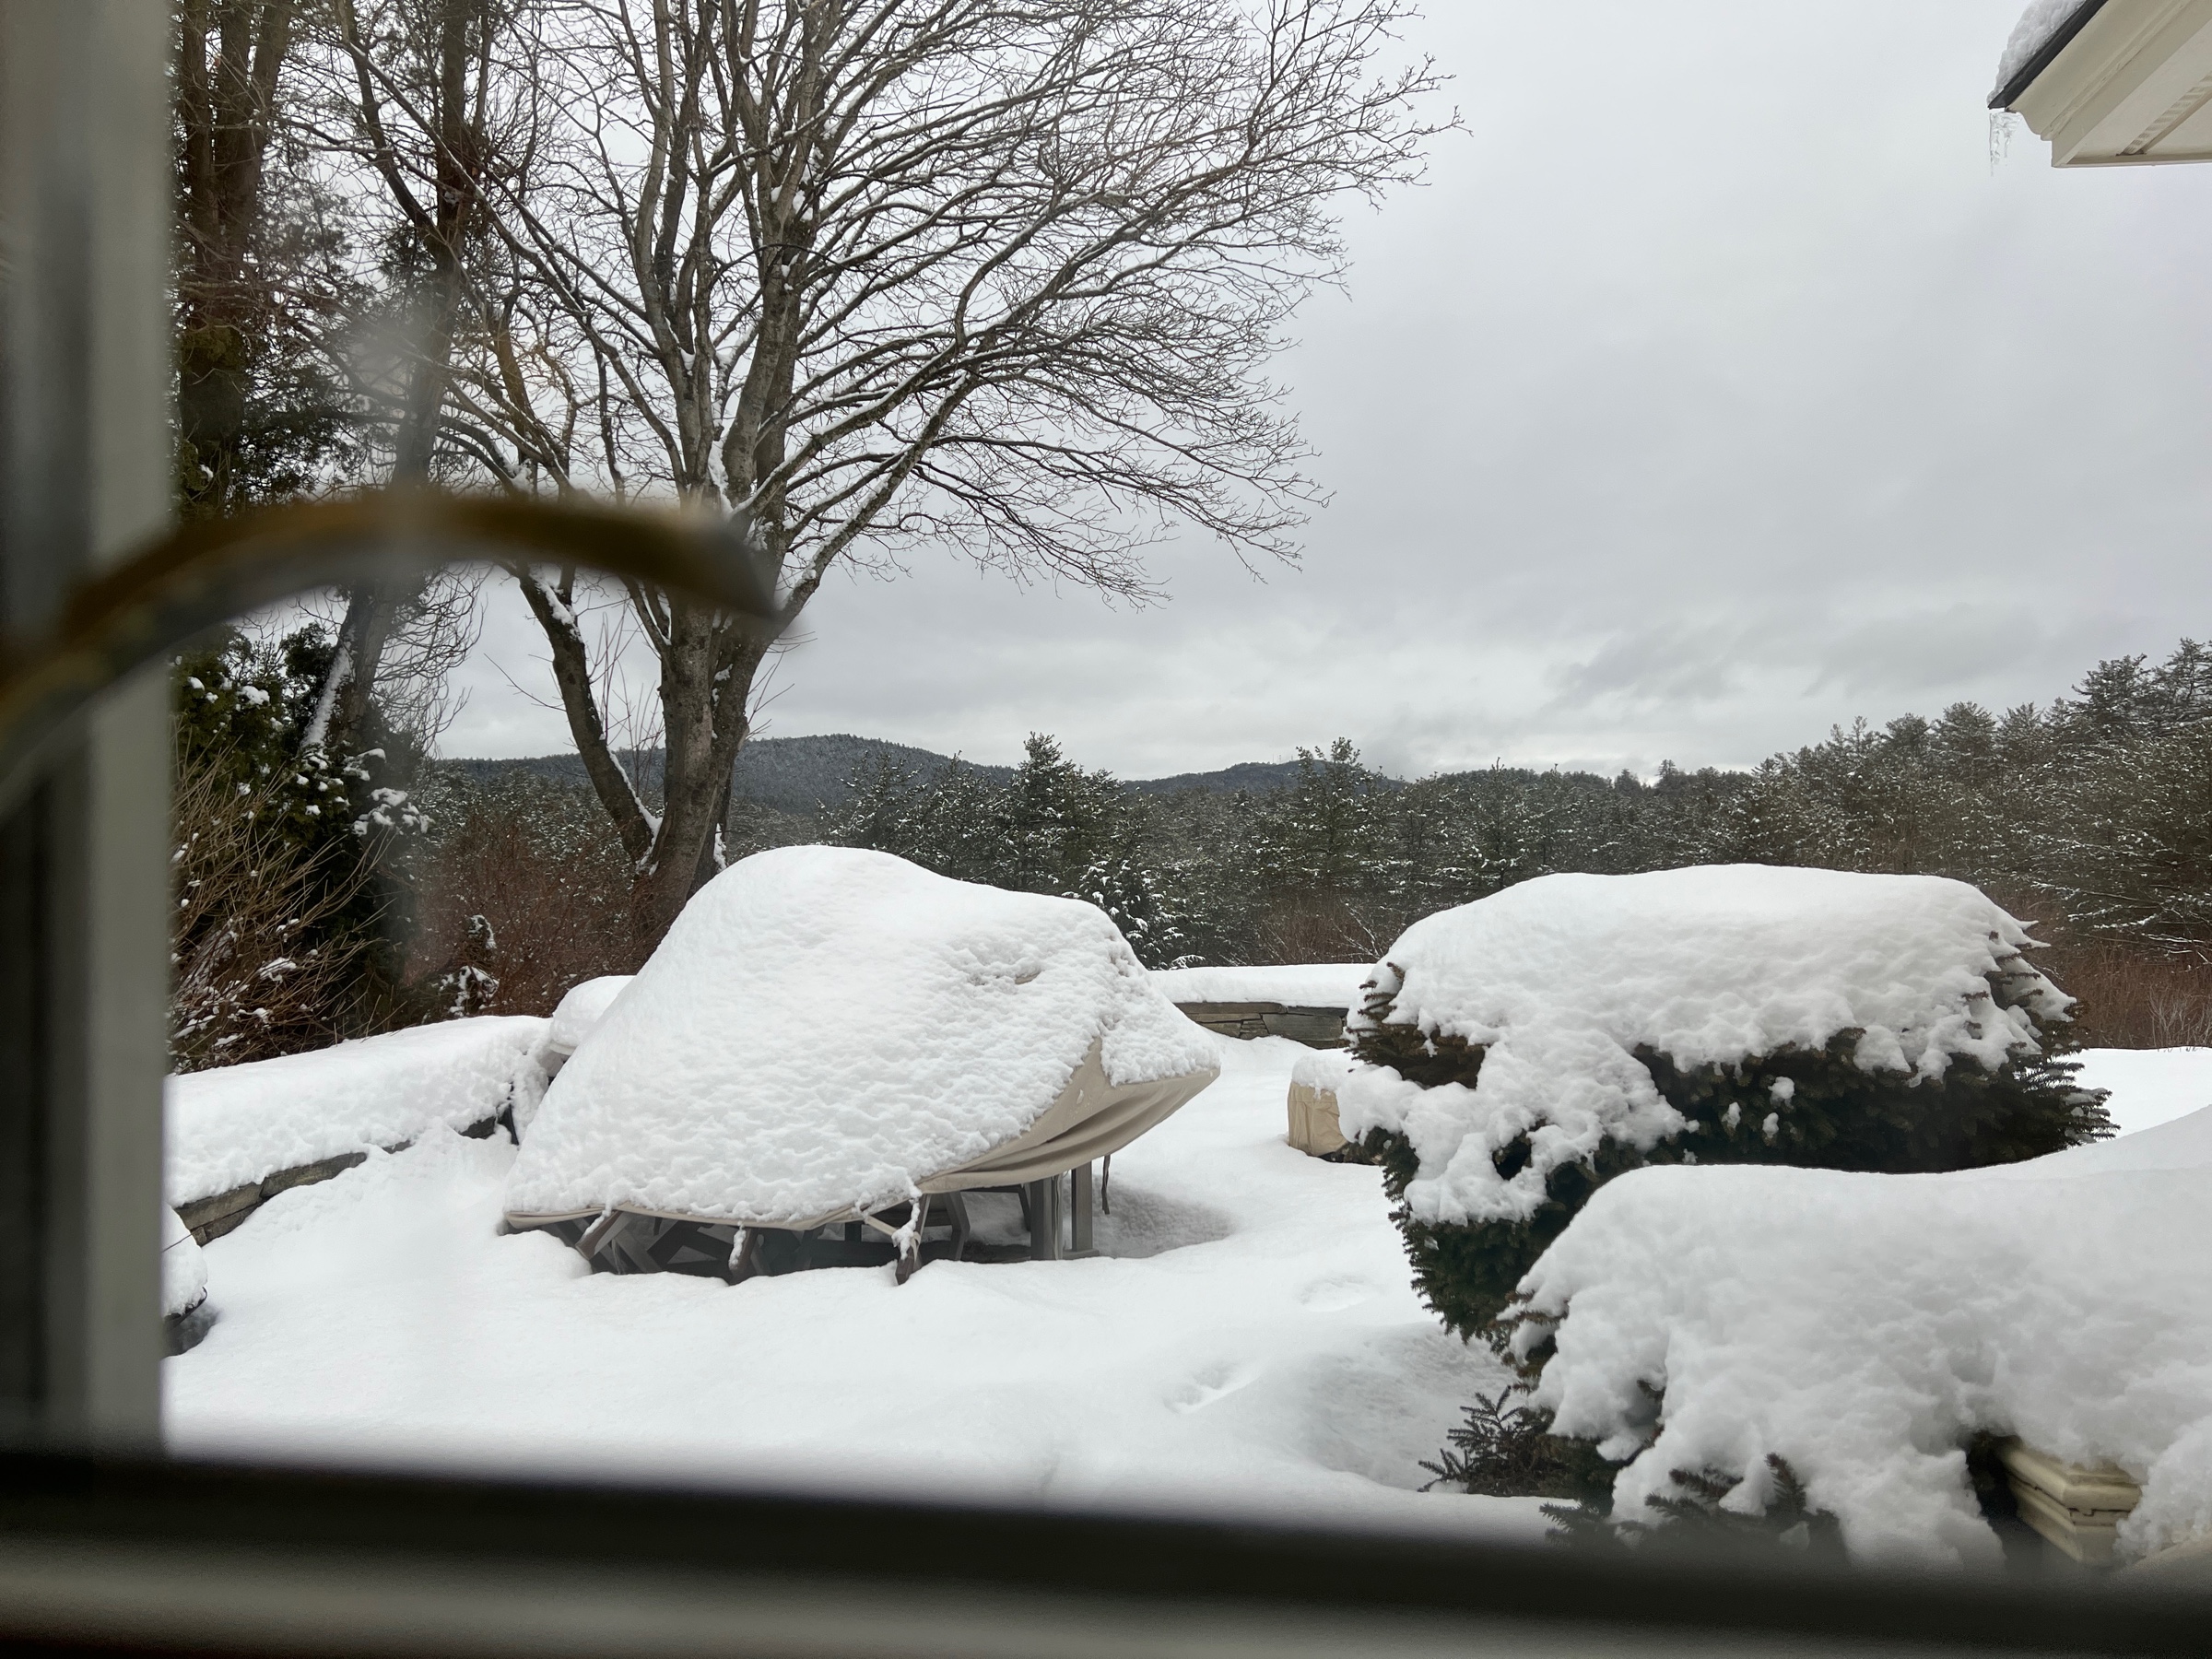 snow-covered patio furniture seen through a window pane with blurry door handle at left